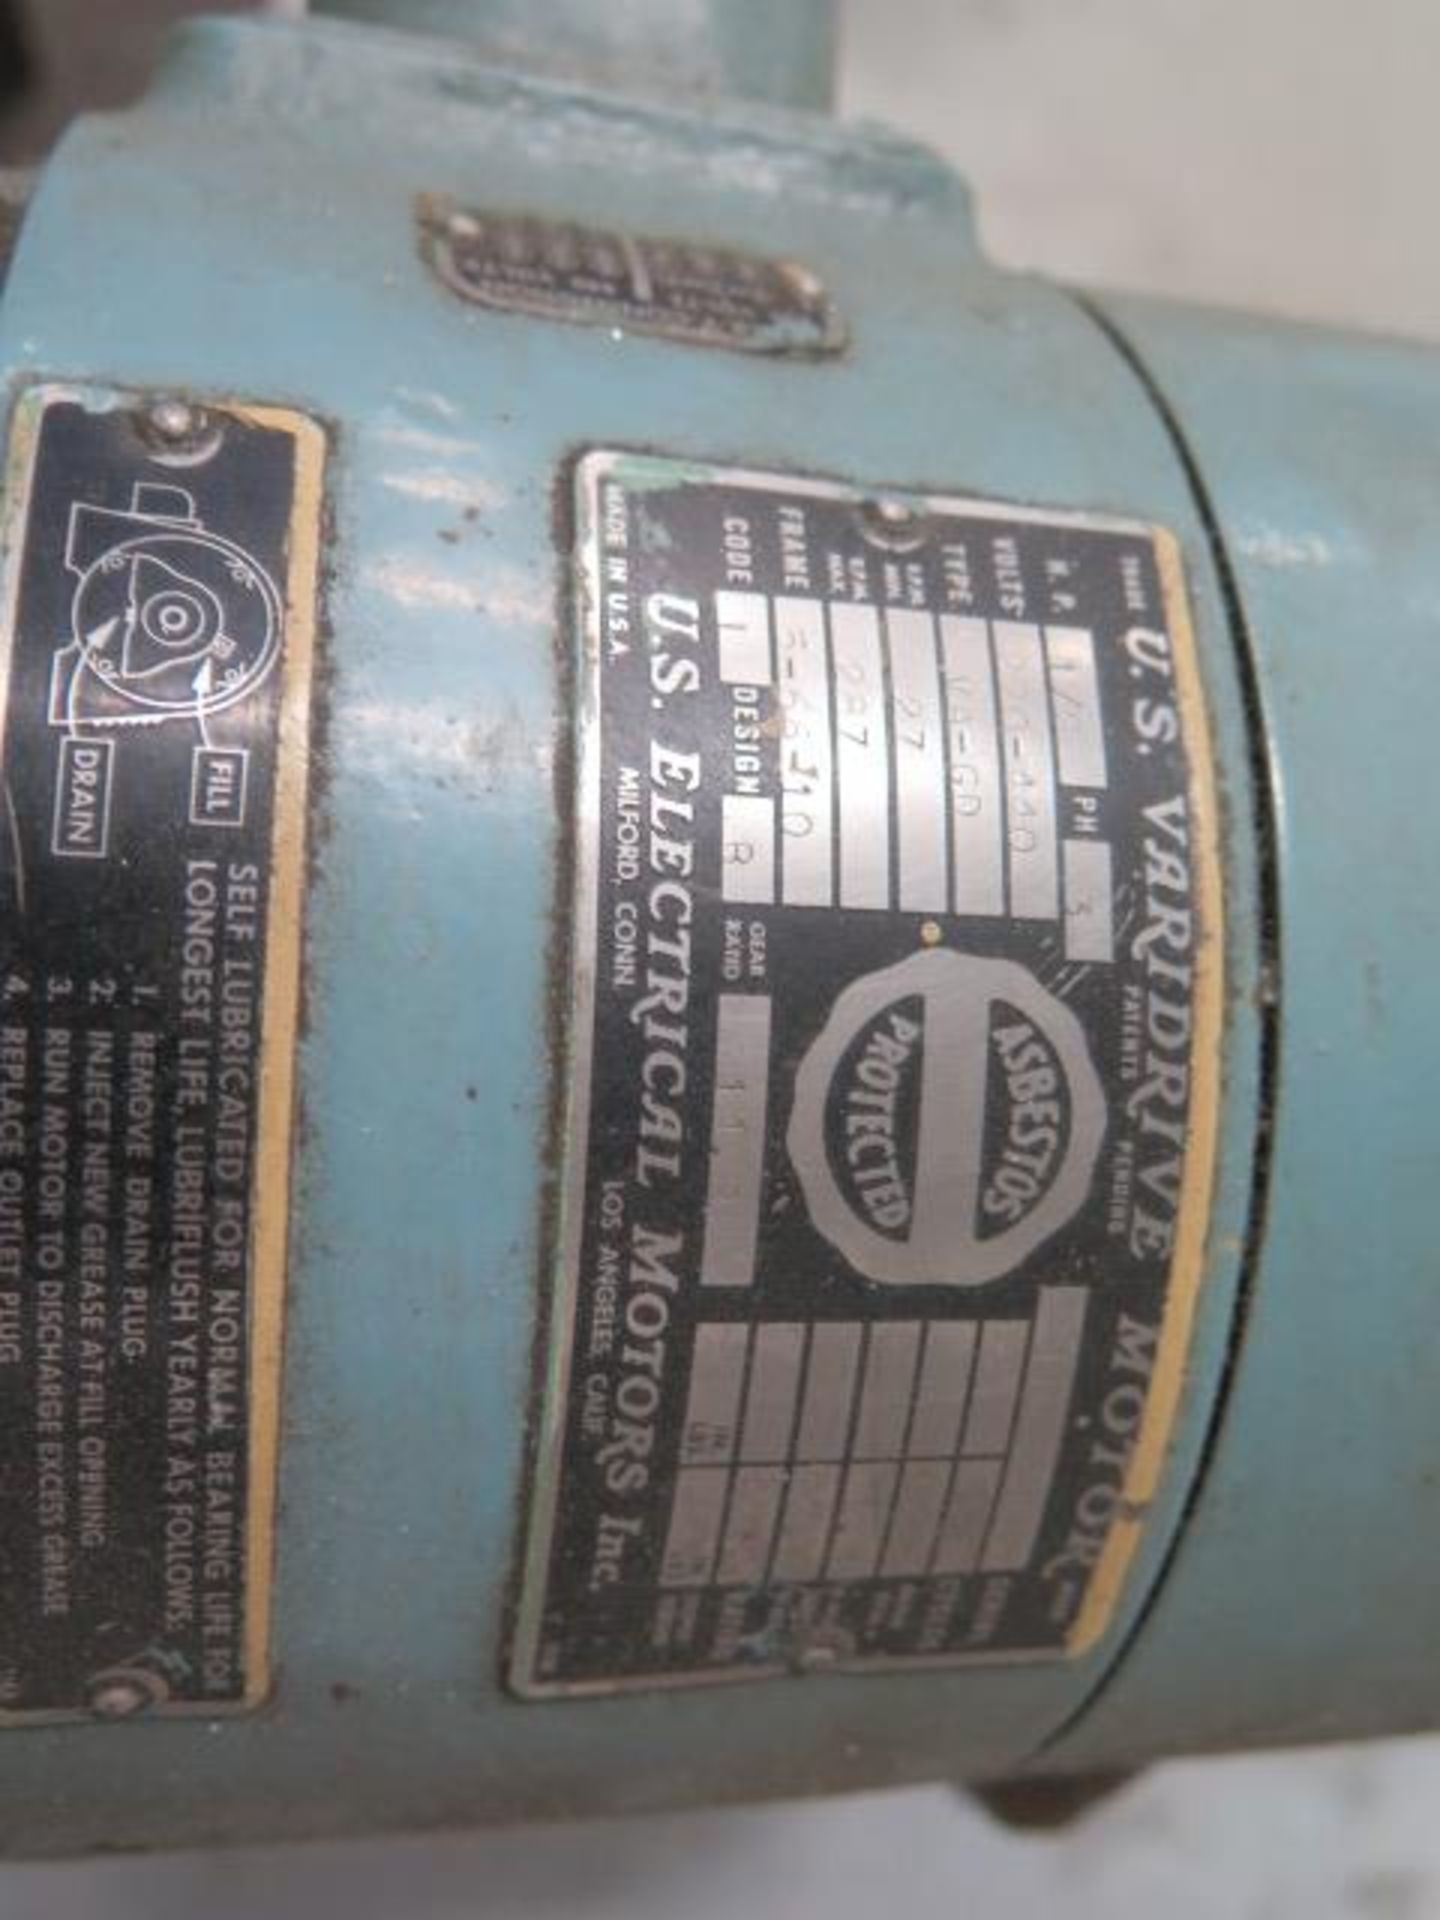 Horizontal Drilling / Reaming Machine w/ 1/2Hp Motor (SOLD AS-IS - NO WARRANTY) - Image 6 of 9